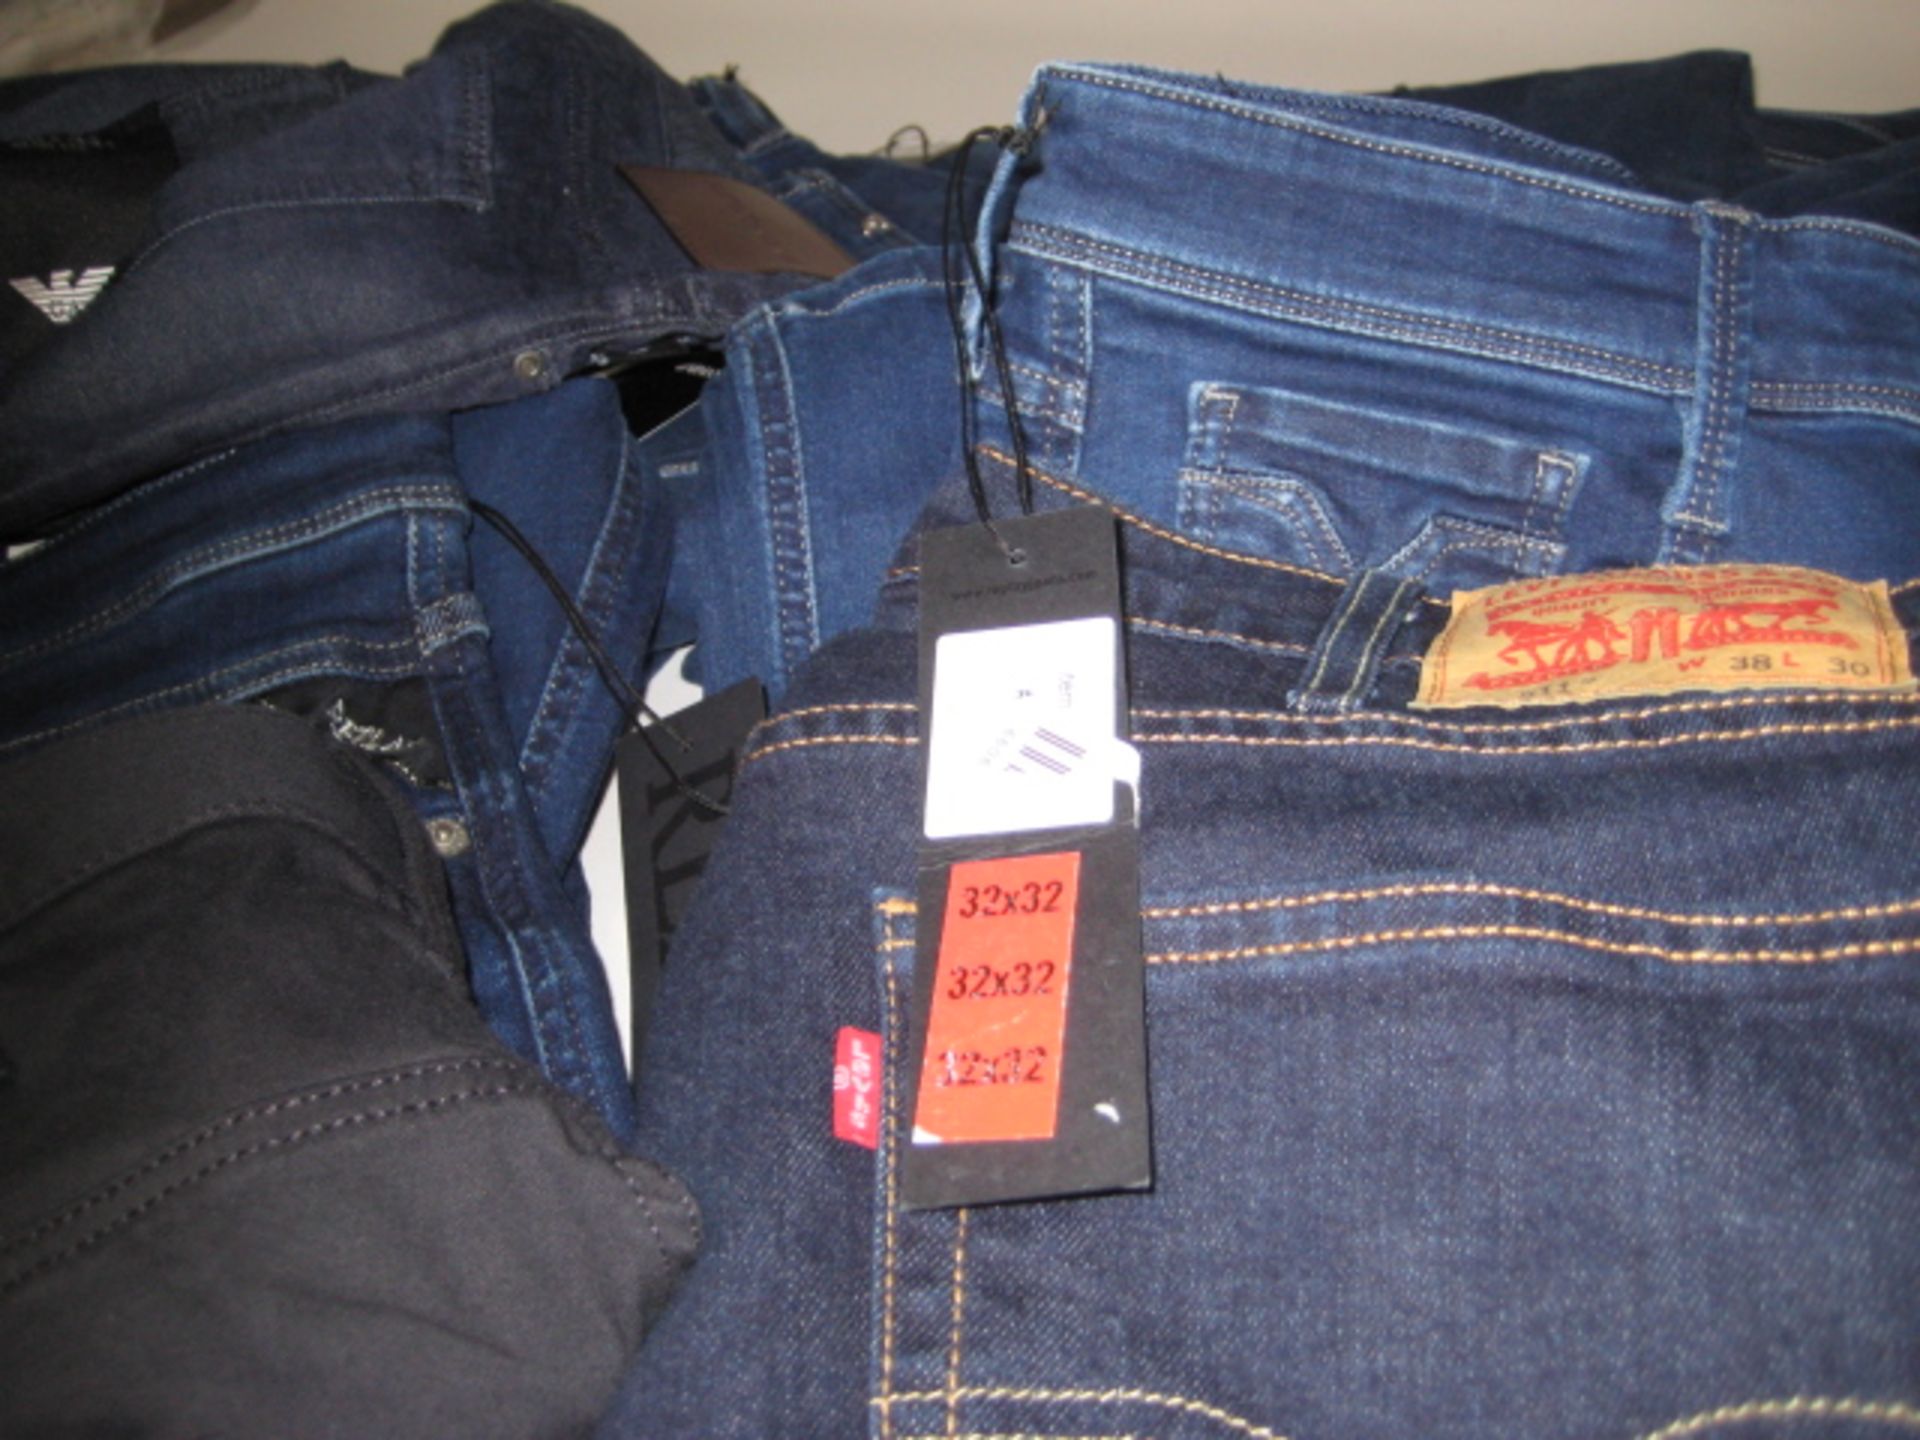 6 pairs of Tag replay jeans various sizes together with 2 pairs of untagged Levi jeans, various - Image 2 of 3